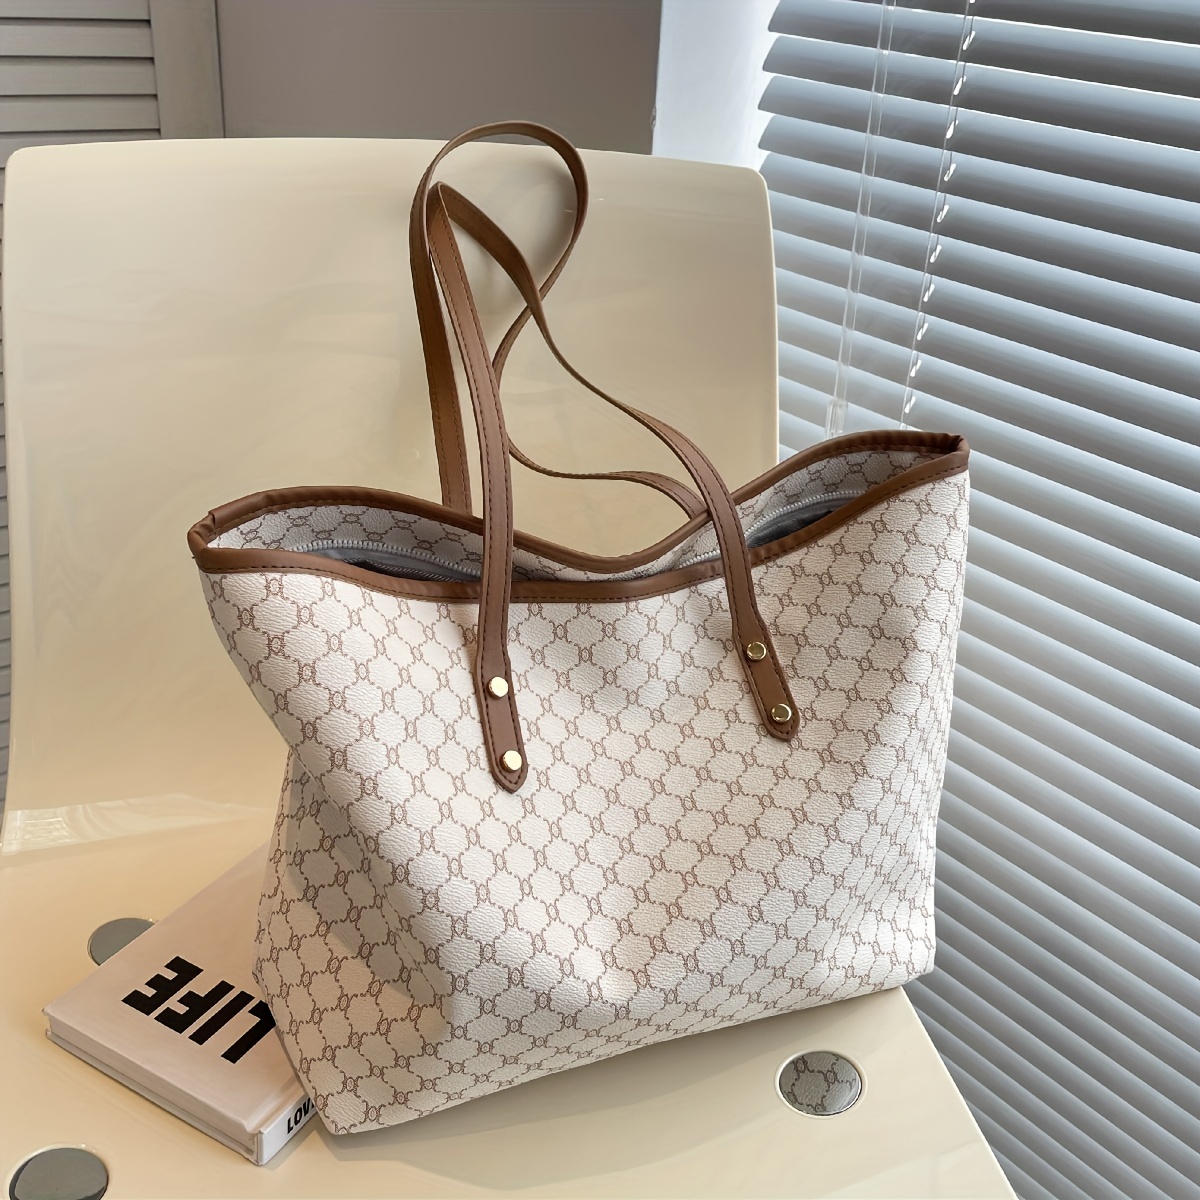 The Large Work Tote in Beige